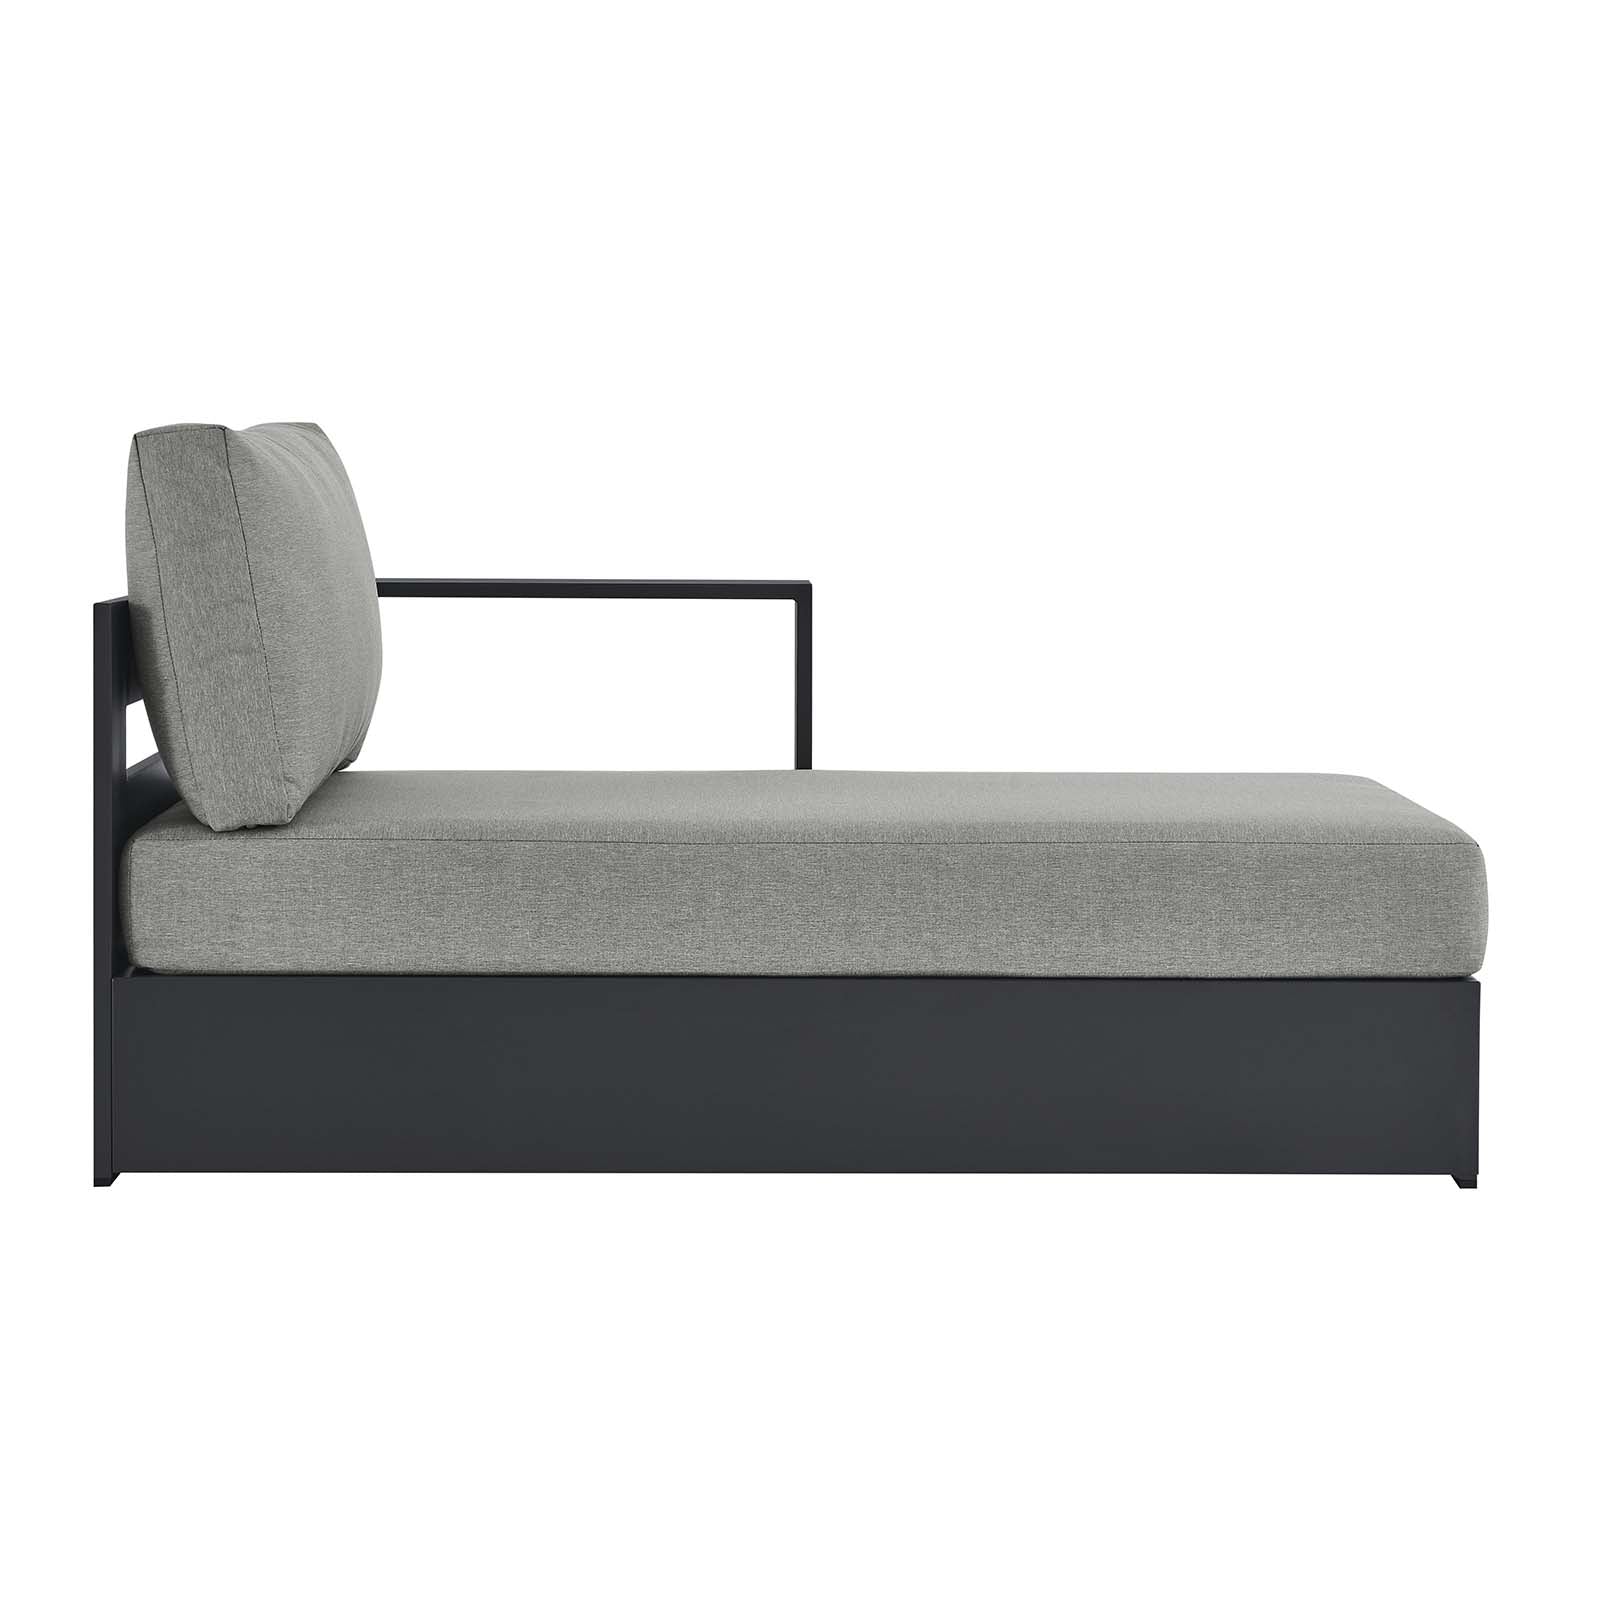 Tahoe Outdoor Patio Powder-Coated Aluminum Modular Right-Facing Chaise Lounge-Outdoor Chaise-Modway-Wall2Wall Furnishings